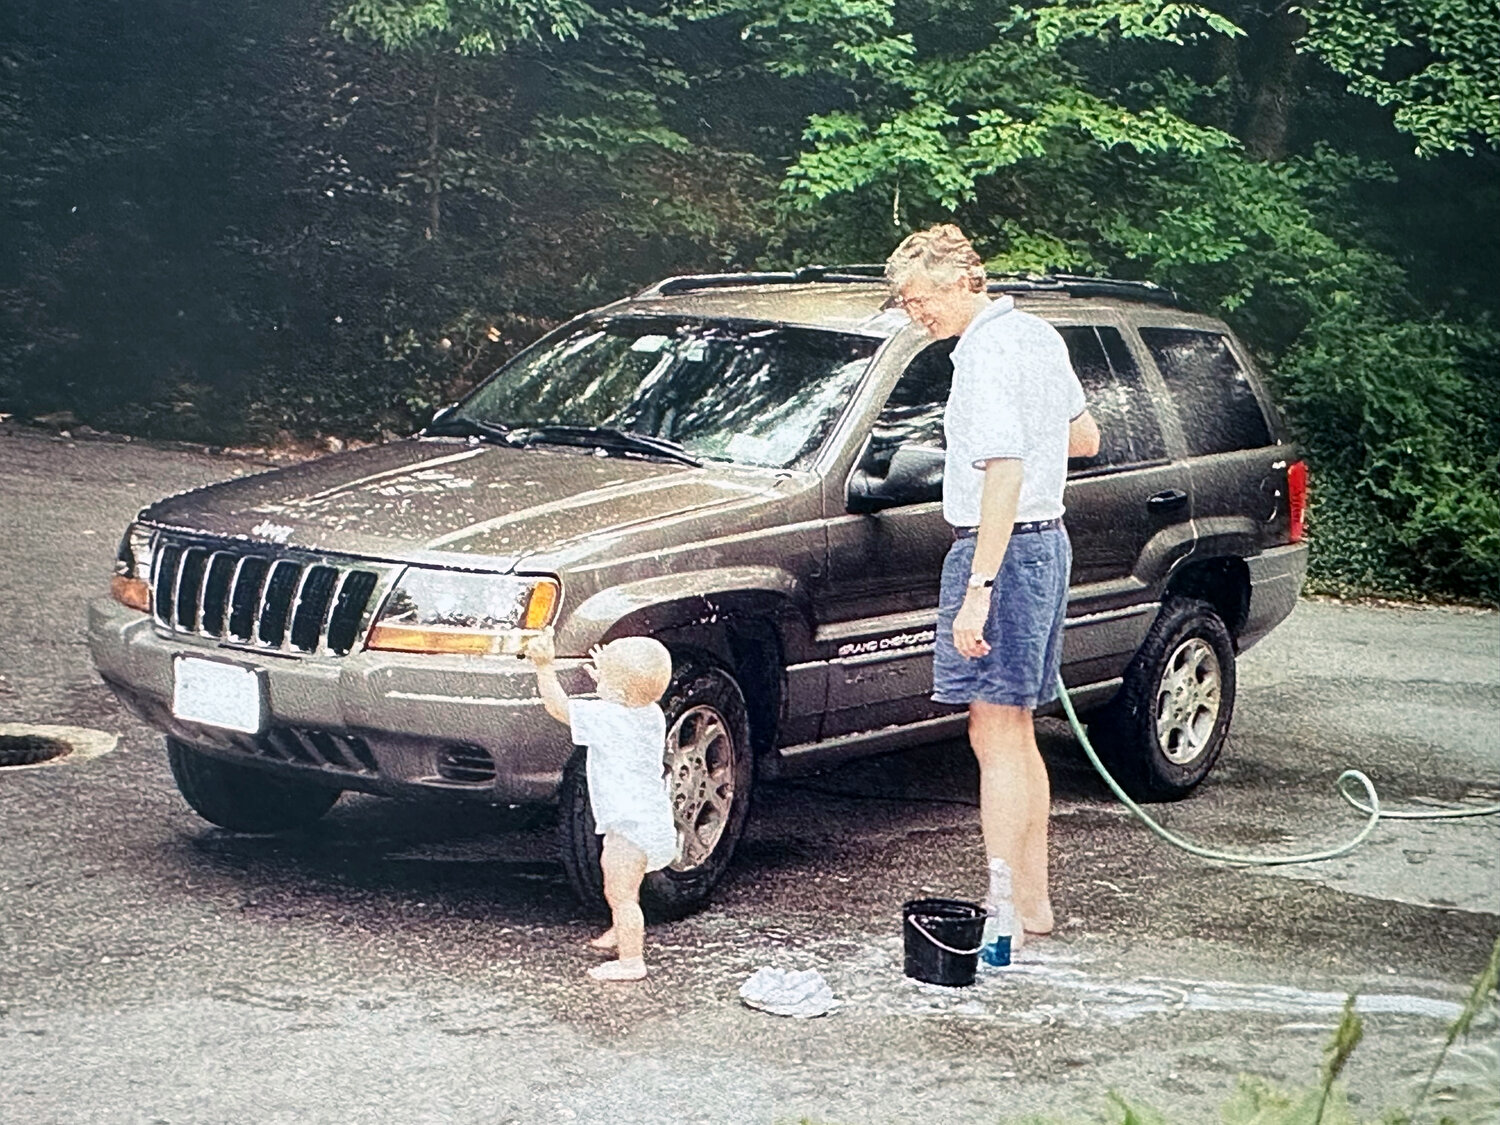 John Niven, who died on Sept. 11, 2001, adored his toddler son, John Jr. He enjoyed involving him in every part of his life, even washing his car on weekends in Oyster Bay.